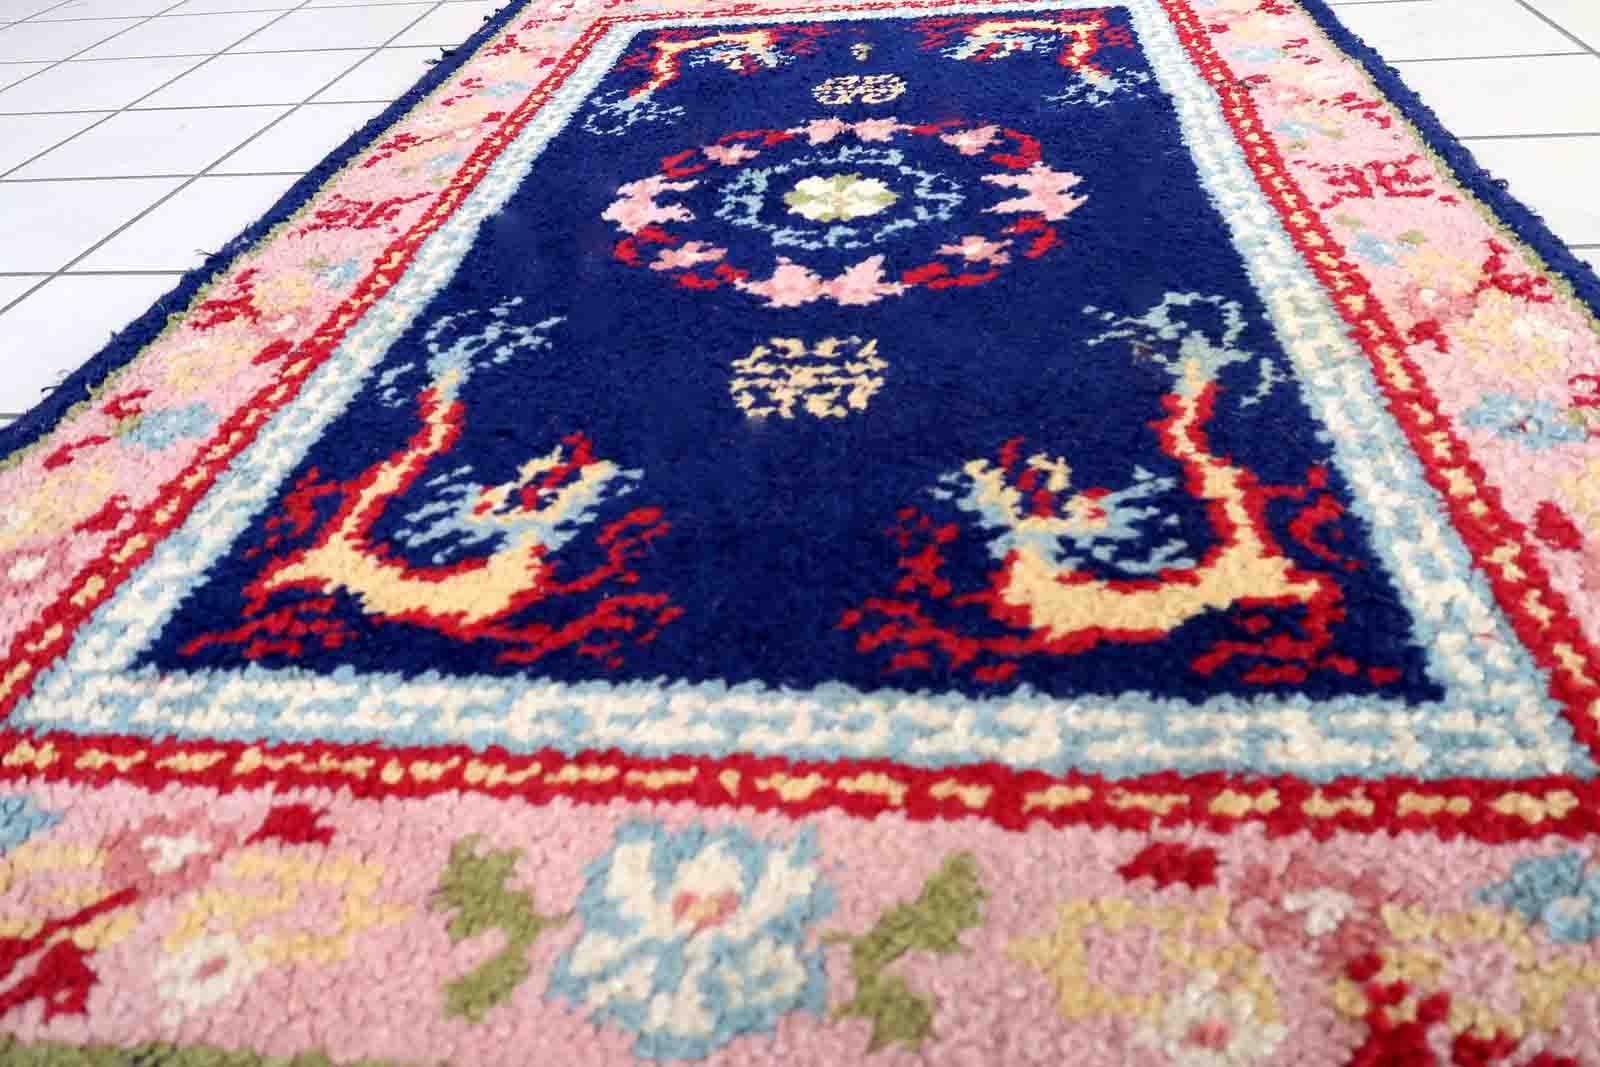 Vintage French Savonnerie rug in night blue and pink colors. The rug has been made in wool in the end of 20th century. It is in original good condition. The rug has dragon design.

-condition: original good,

-circa: 1960s,

-size: 2.9' x 4.5'